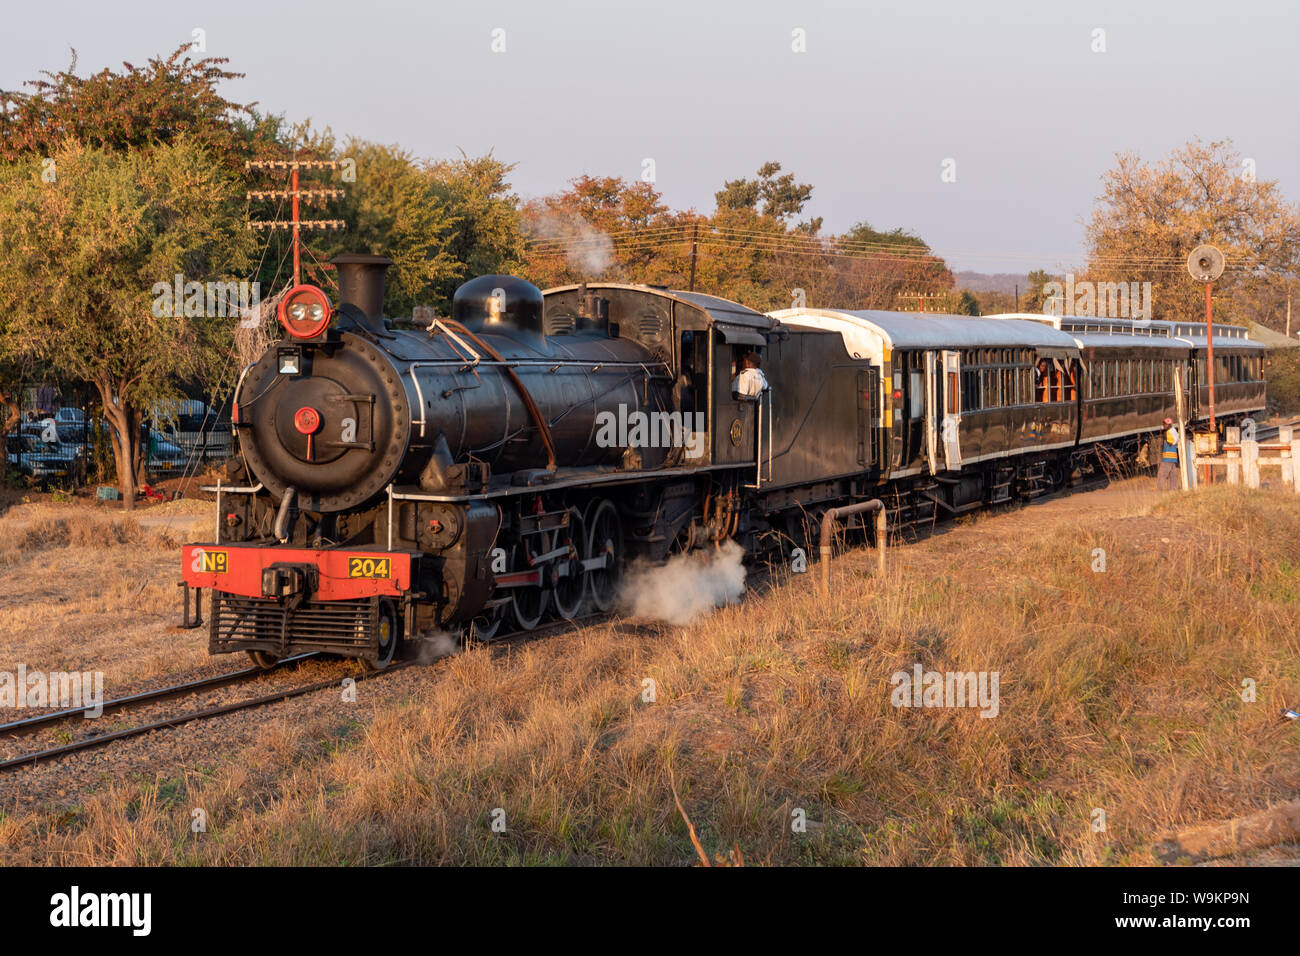 Victoria Falls, Zimbabwe - August 2 2019: Steam Train with Engine at Victoria Falls, pulled by Zambia Railways Steam locomotive 204. Stock Photo